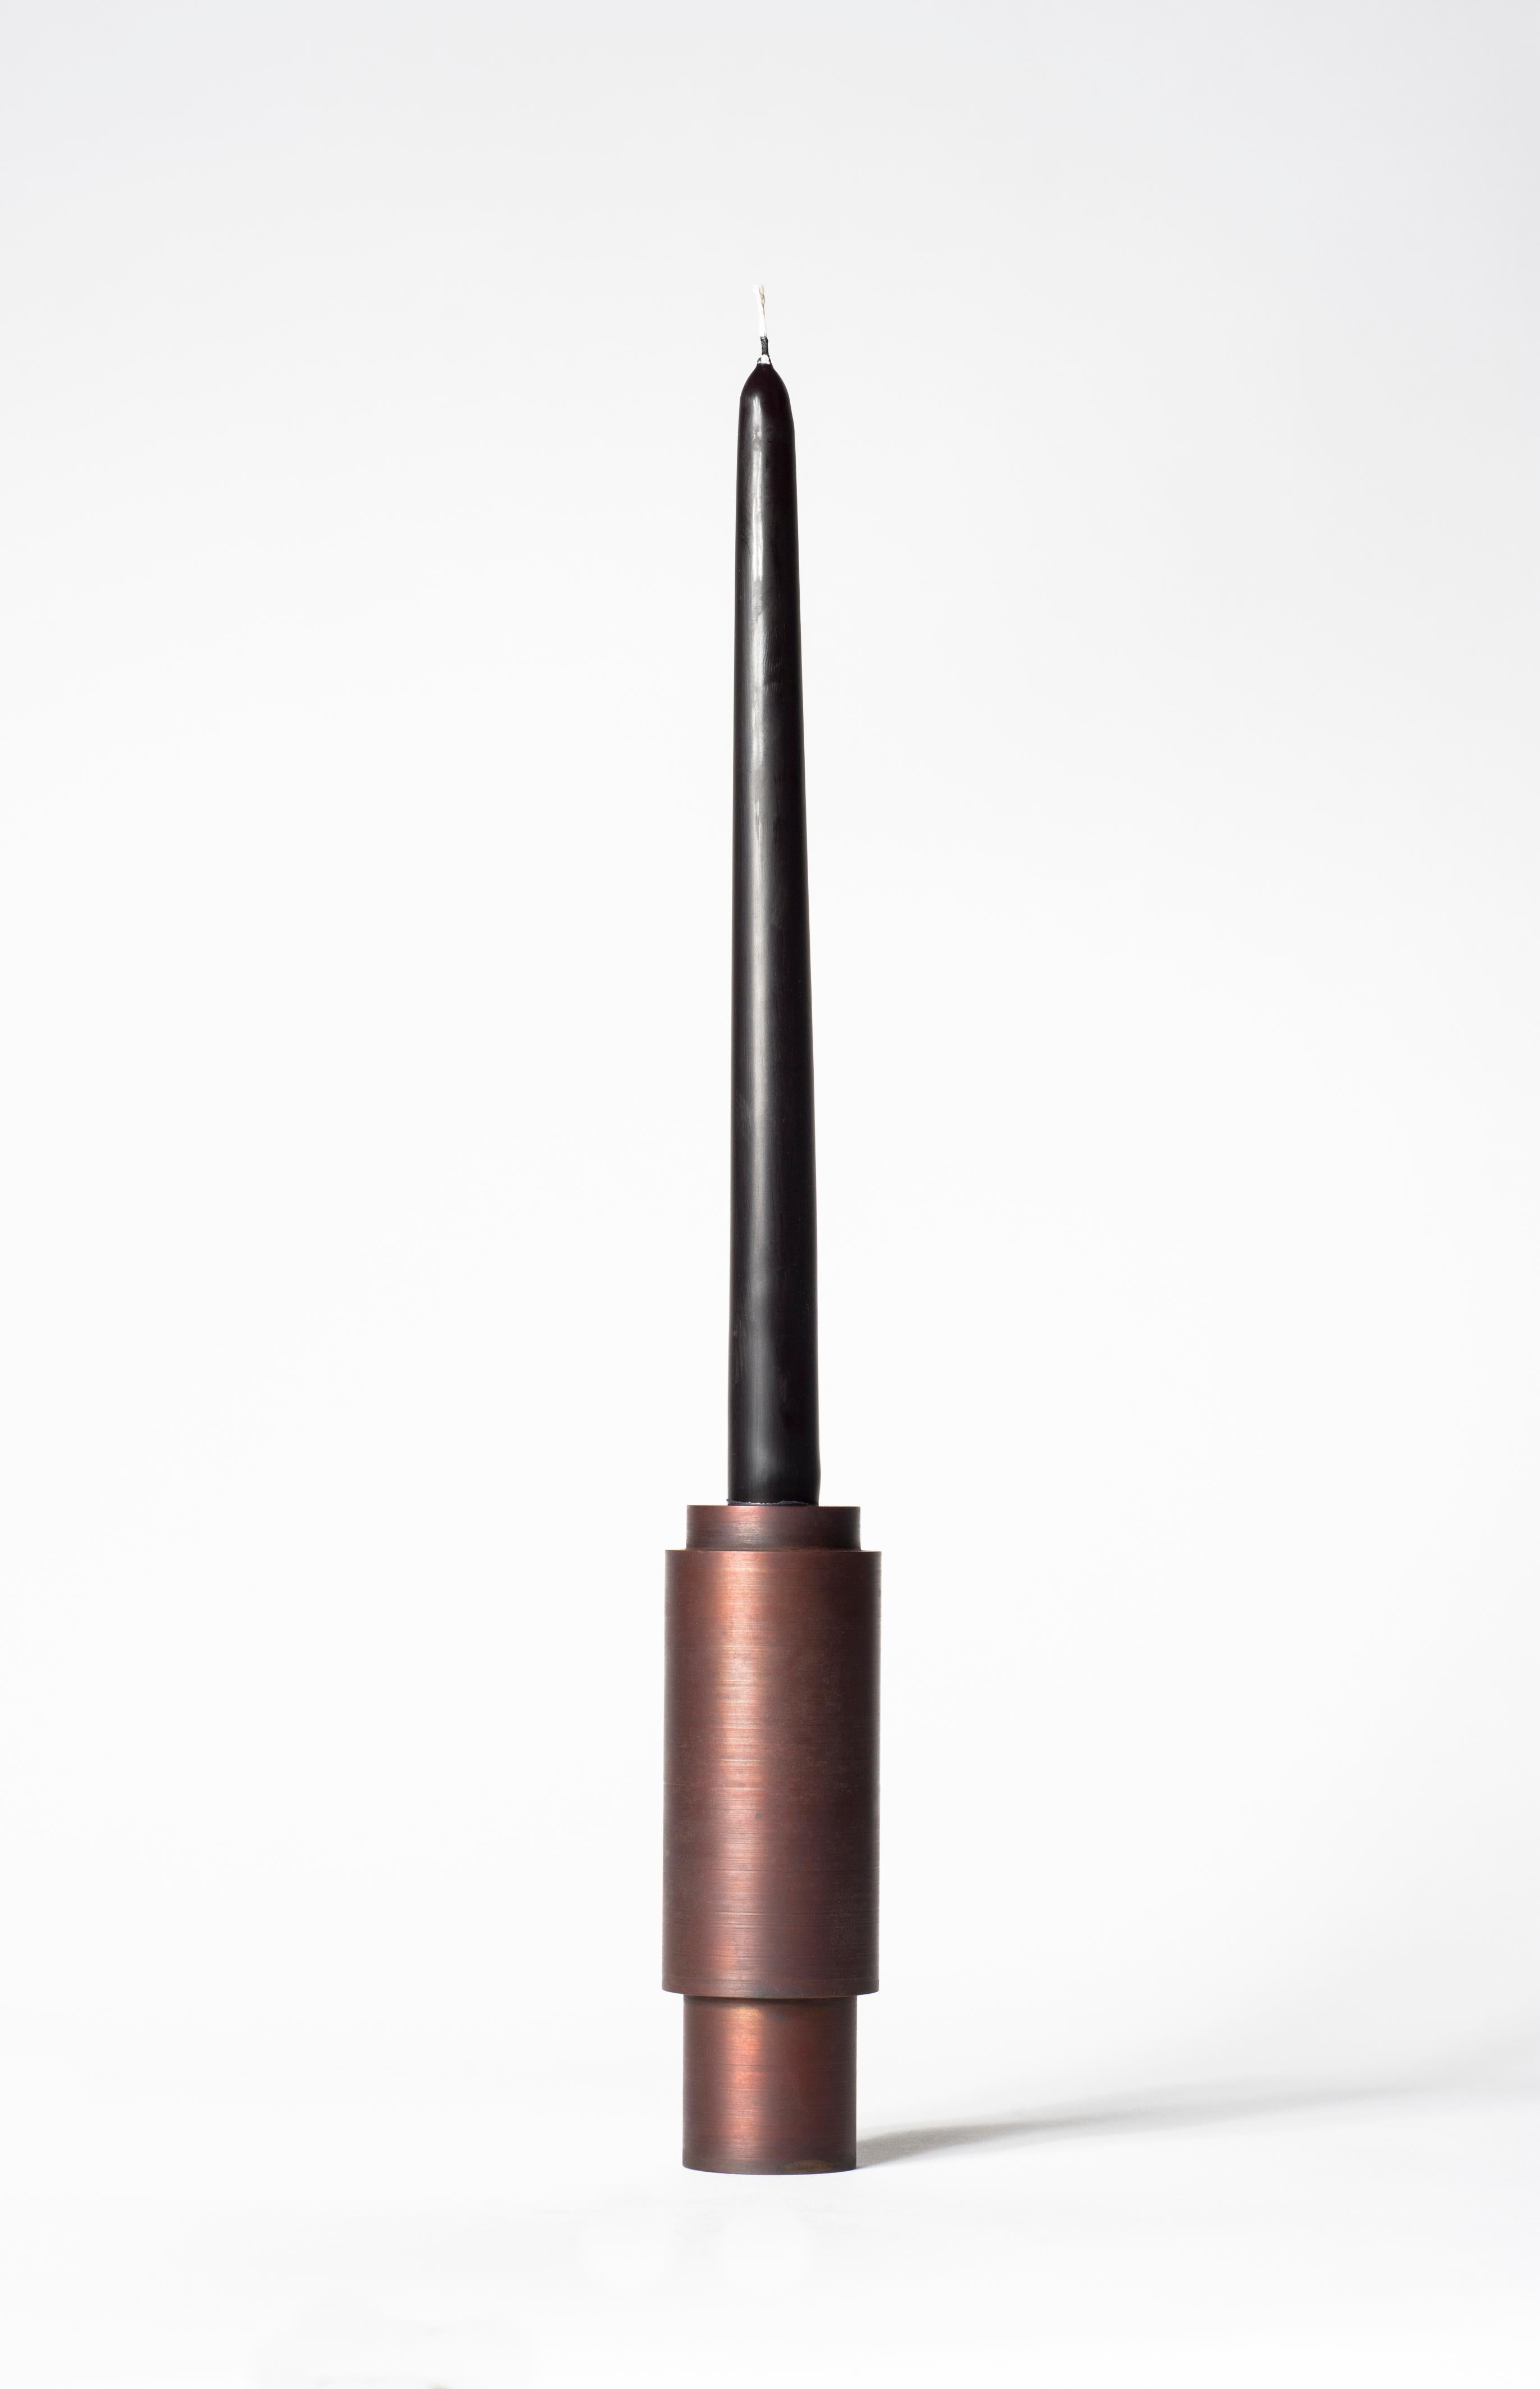 Brown patina steel candlestick by Lukasz Friedrich.
Dimensions: D 5 x H 15 cm
Materials: Brown patina on steel.